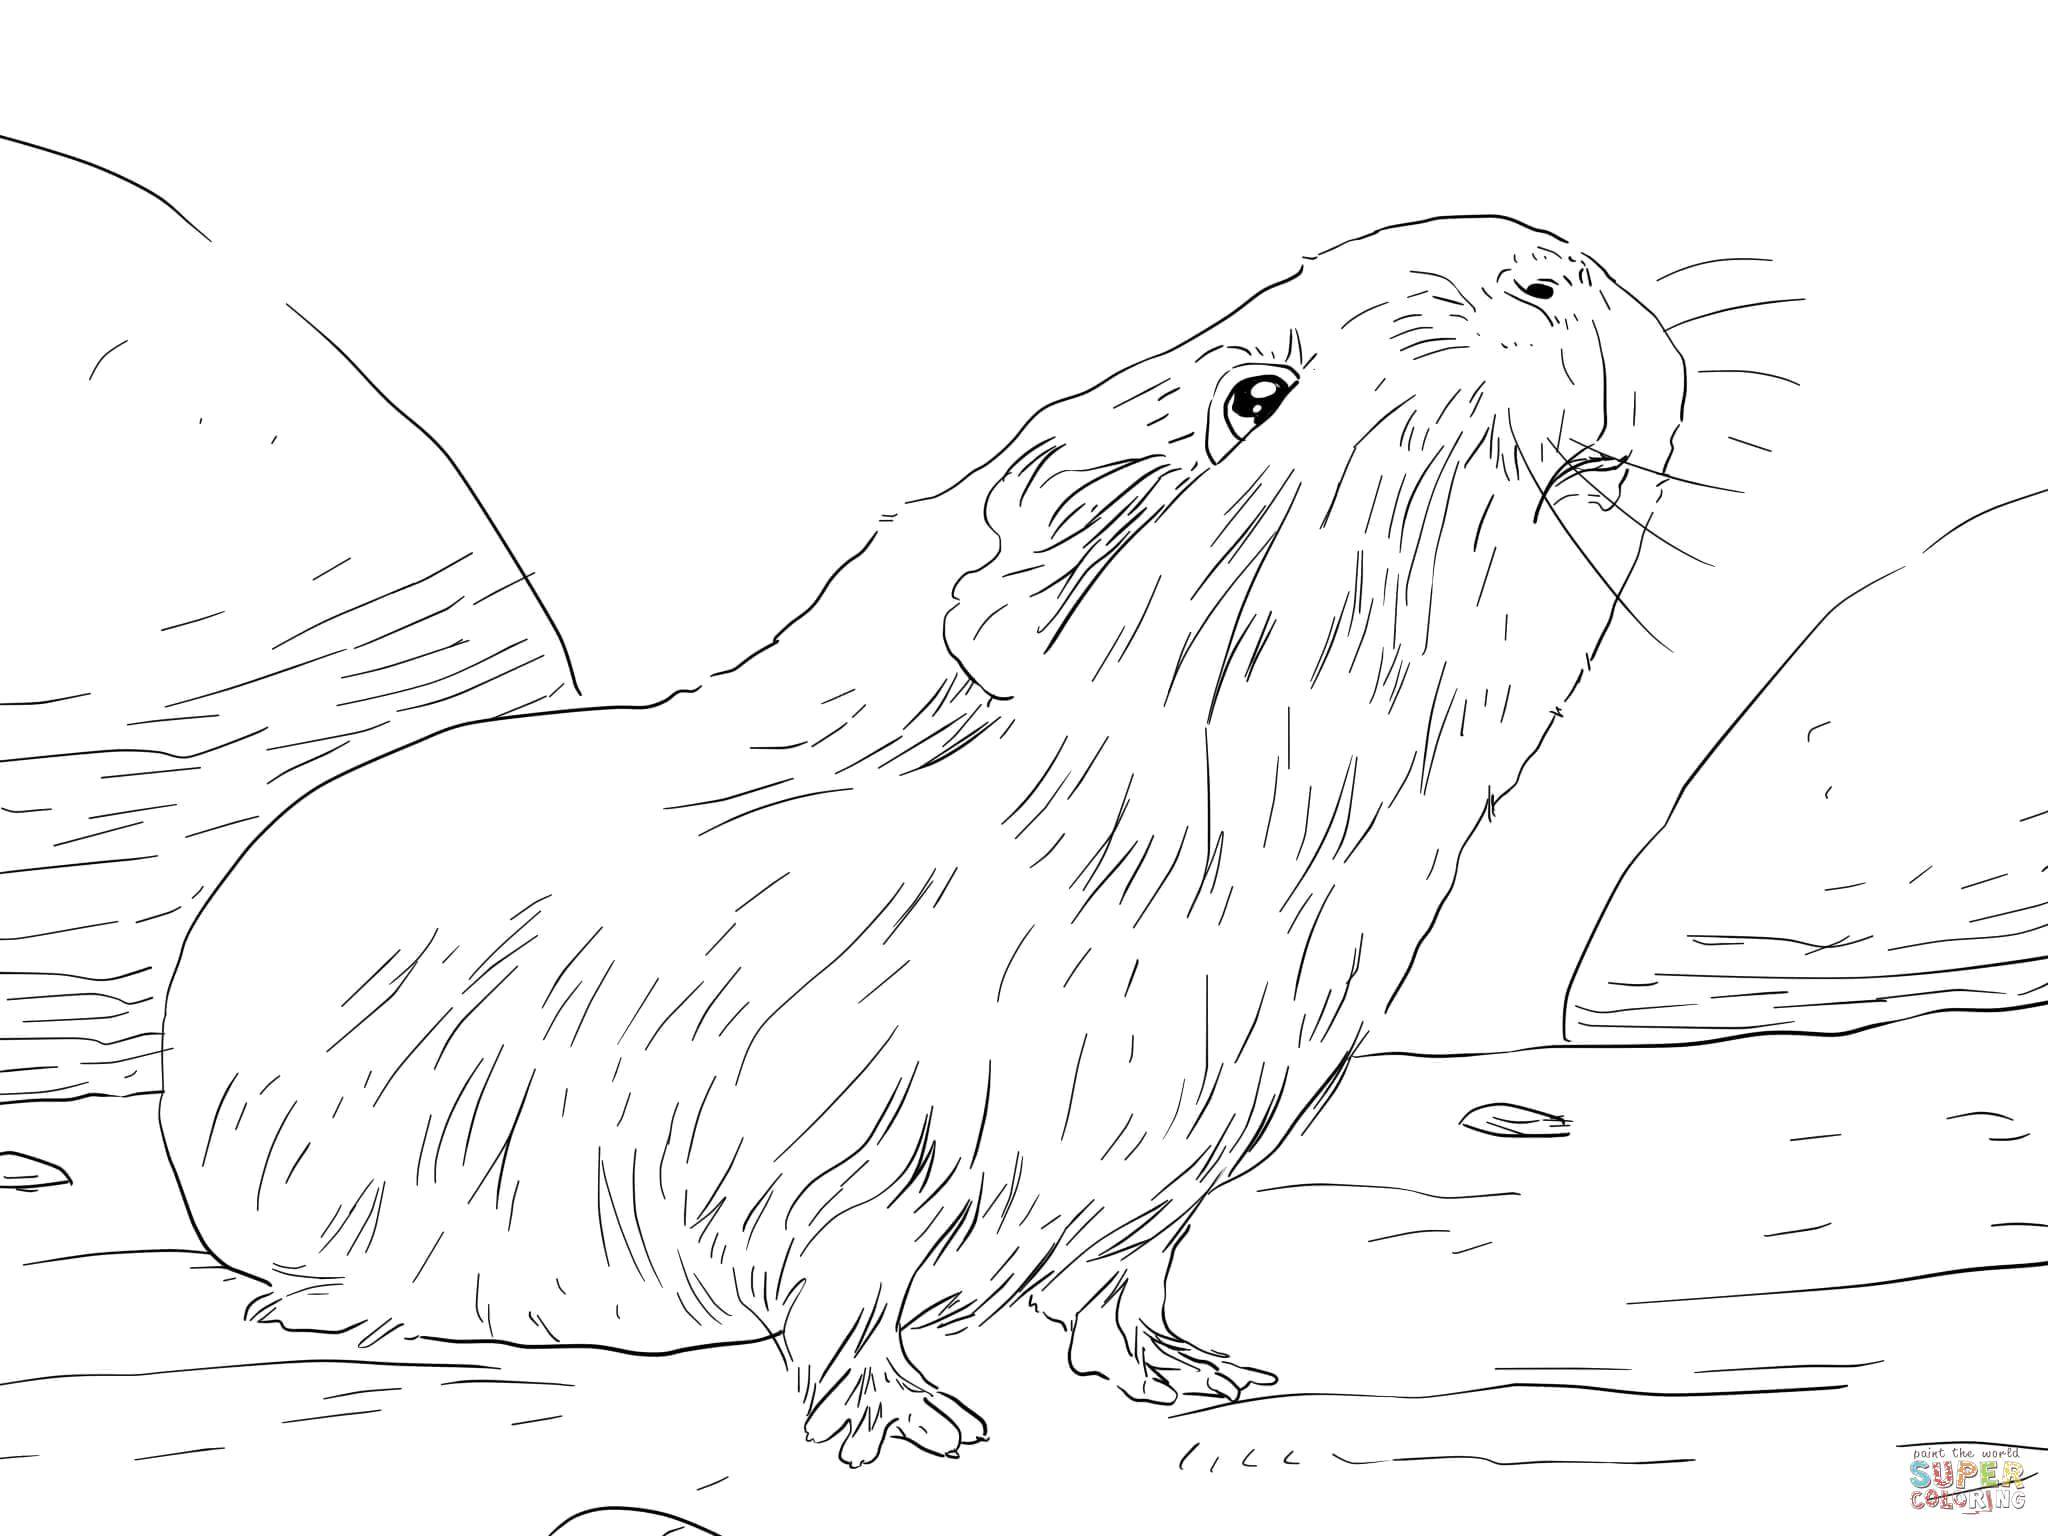 Coloring The capybara. Category Animals. Tags:  Animals.